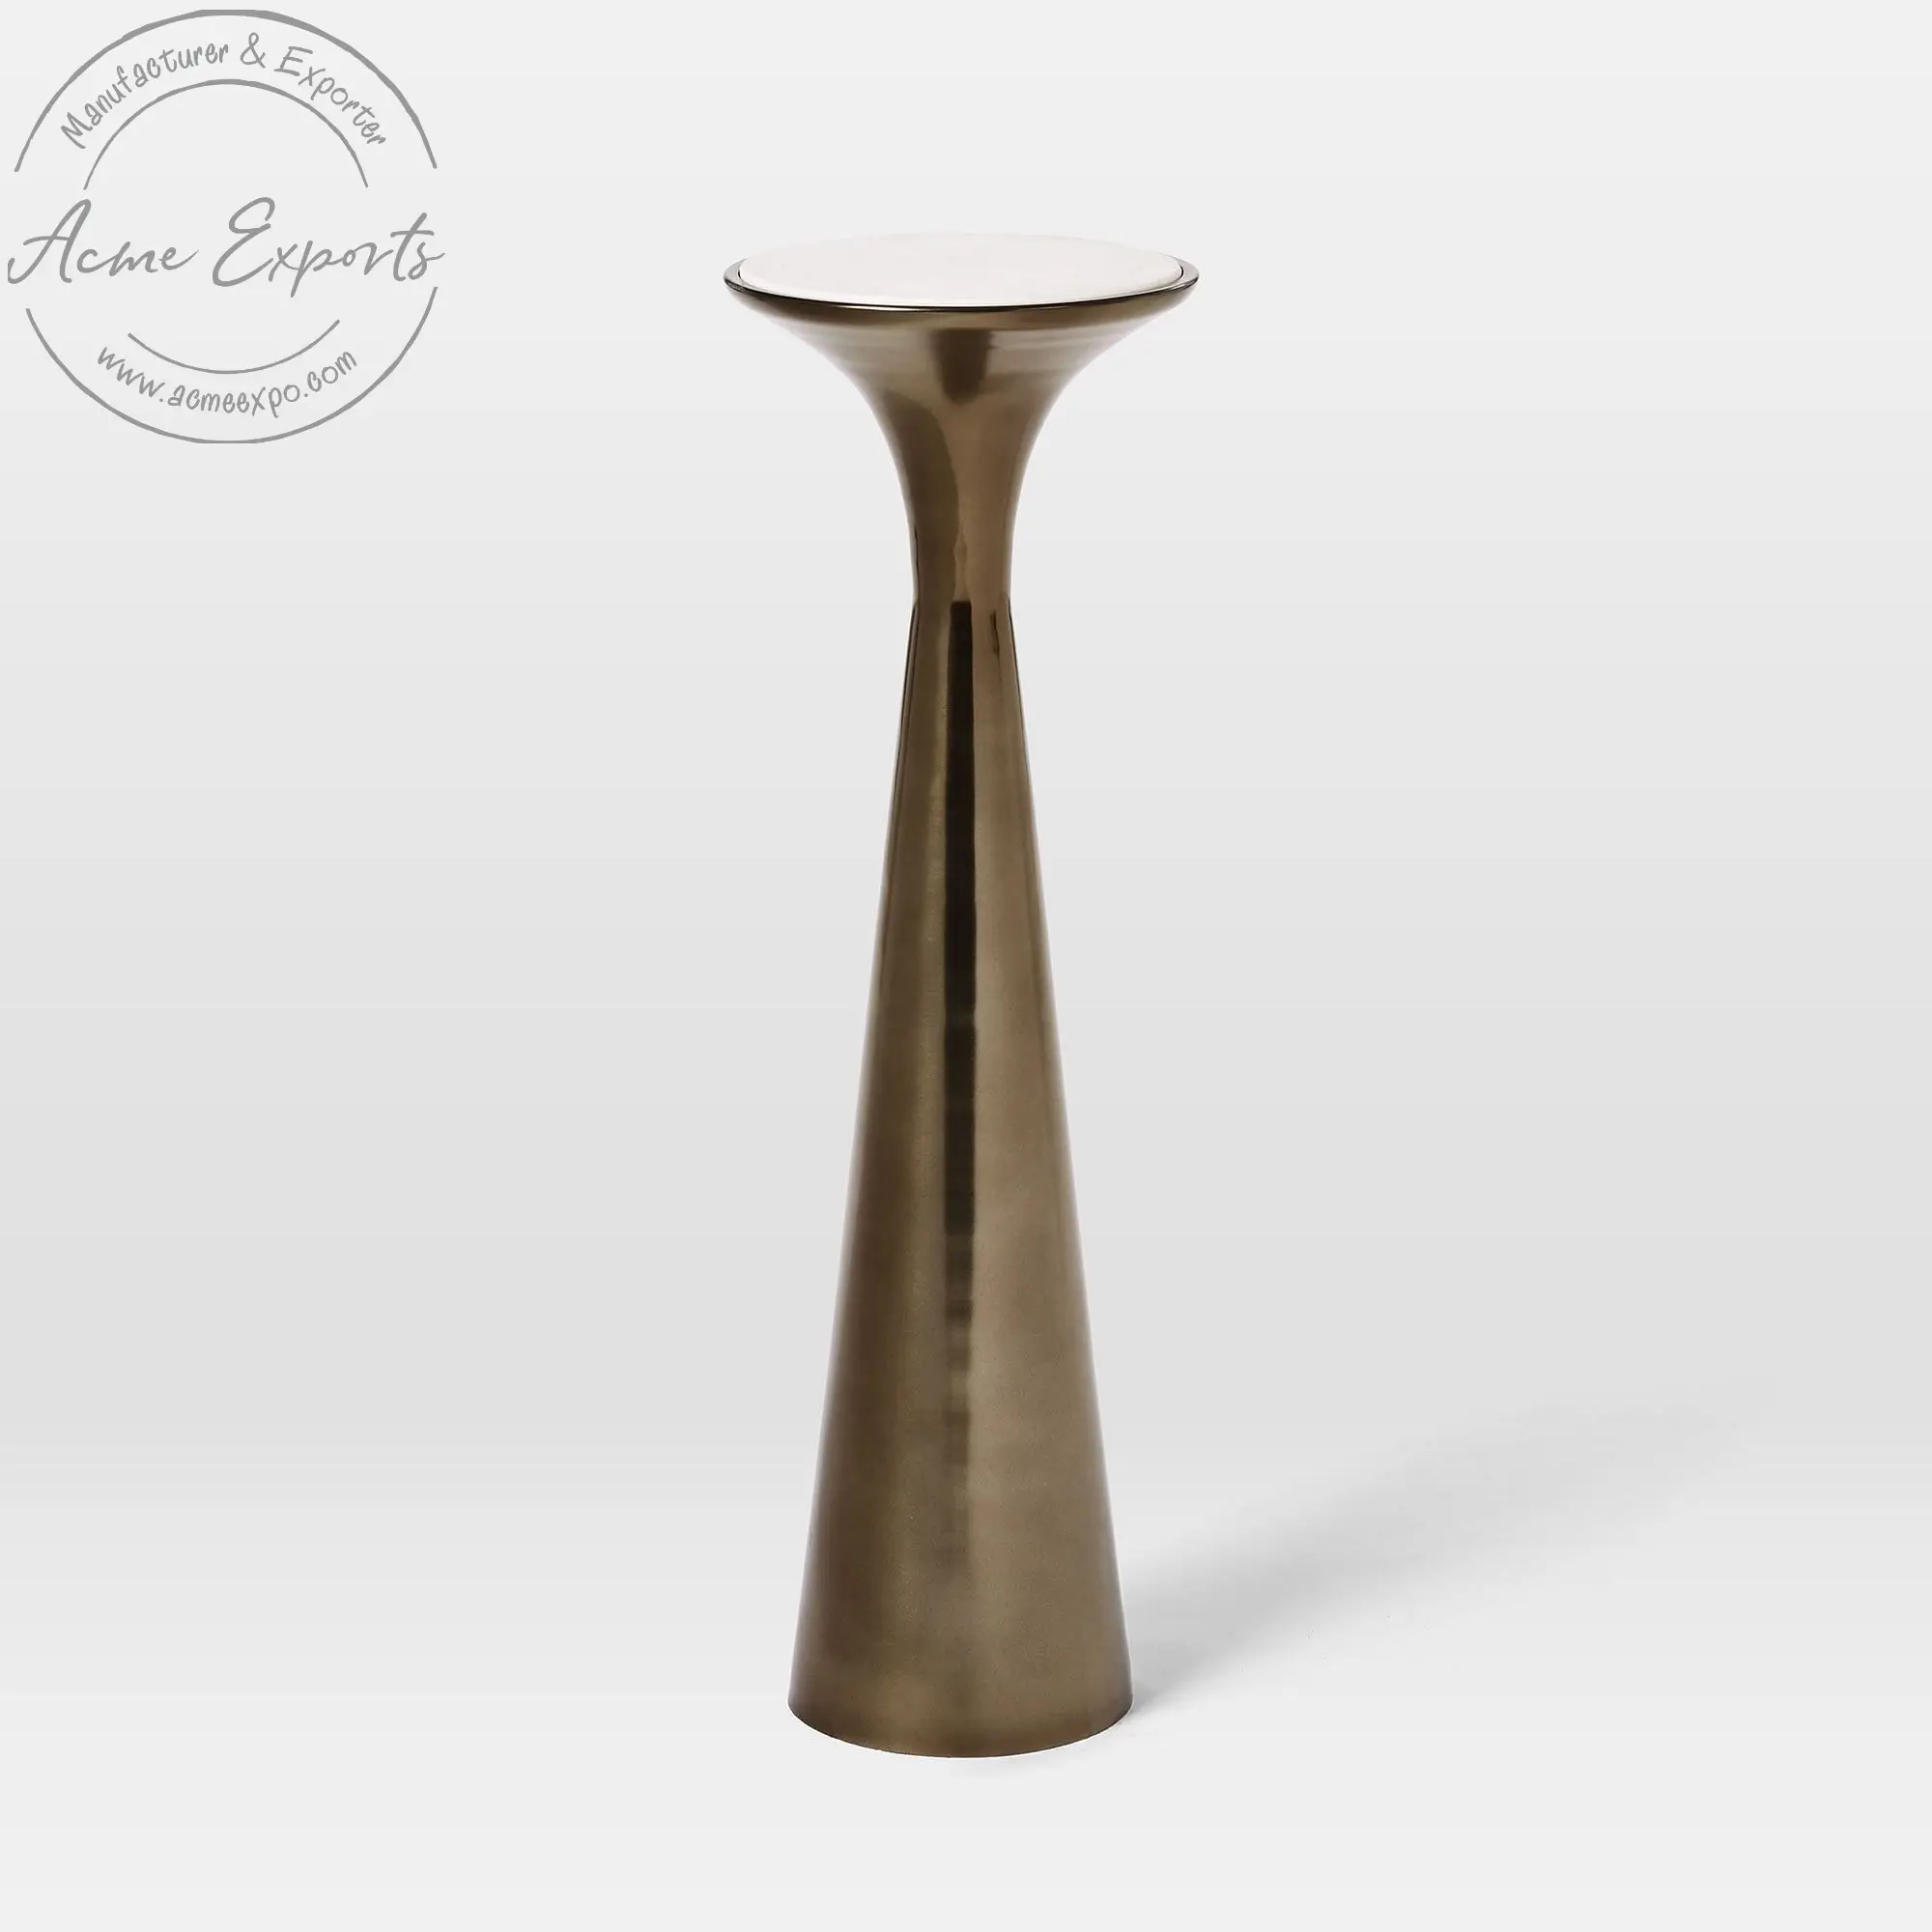 Manufacturer Handcrafted Gold Finished Stainless Steel Base Pedestal Drink Table with Marble Top Used for Home Bar Interior